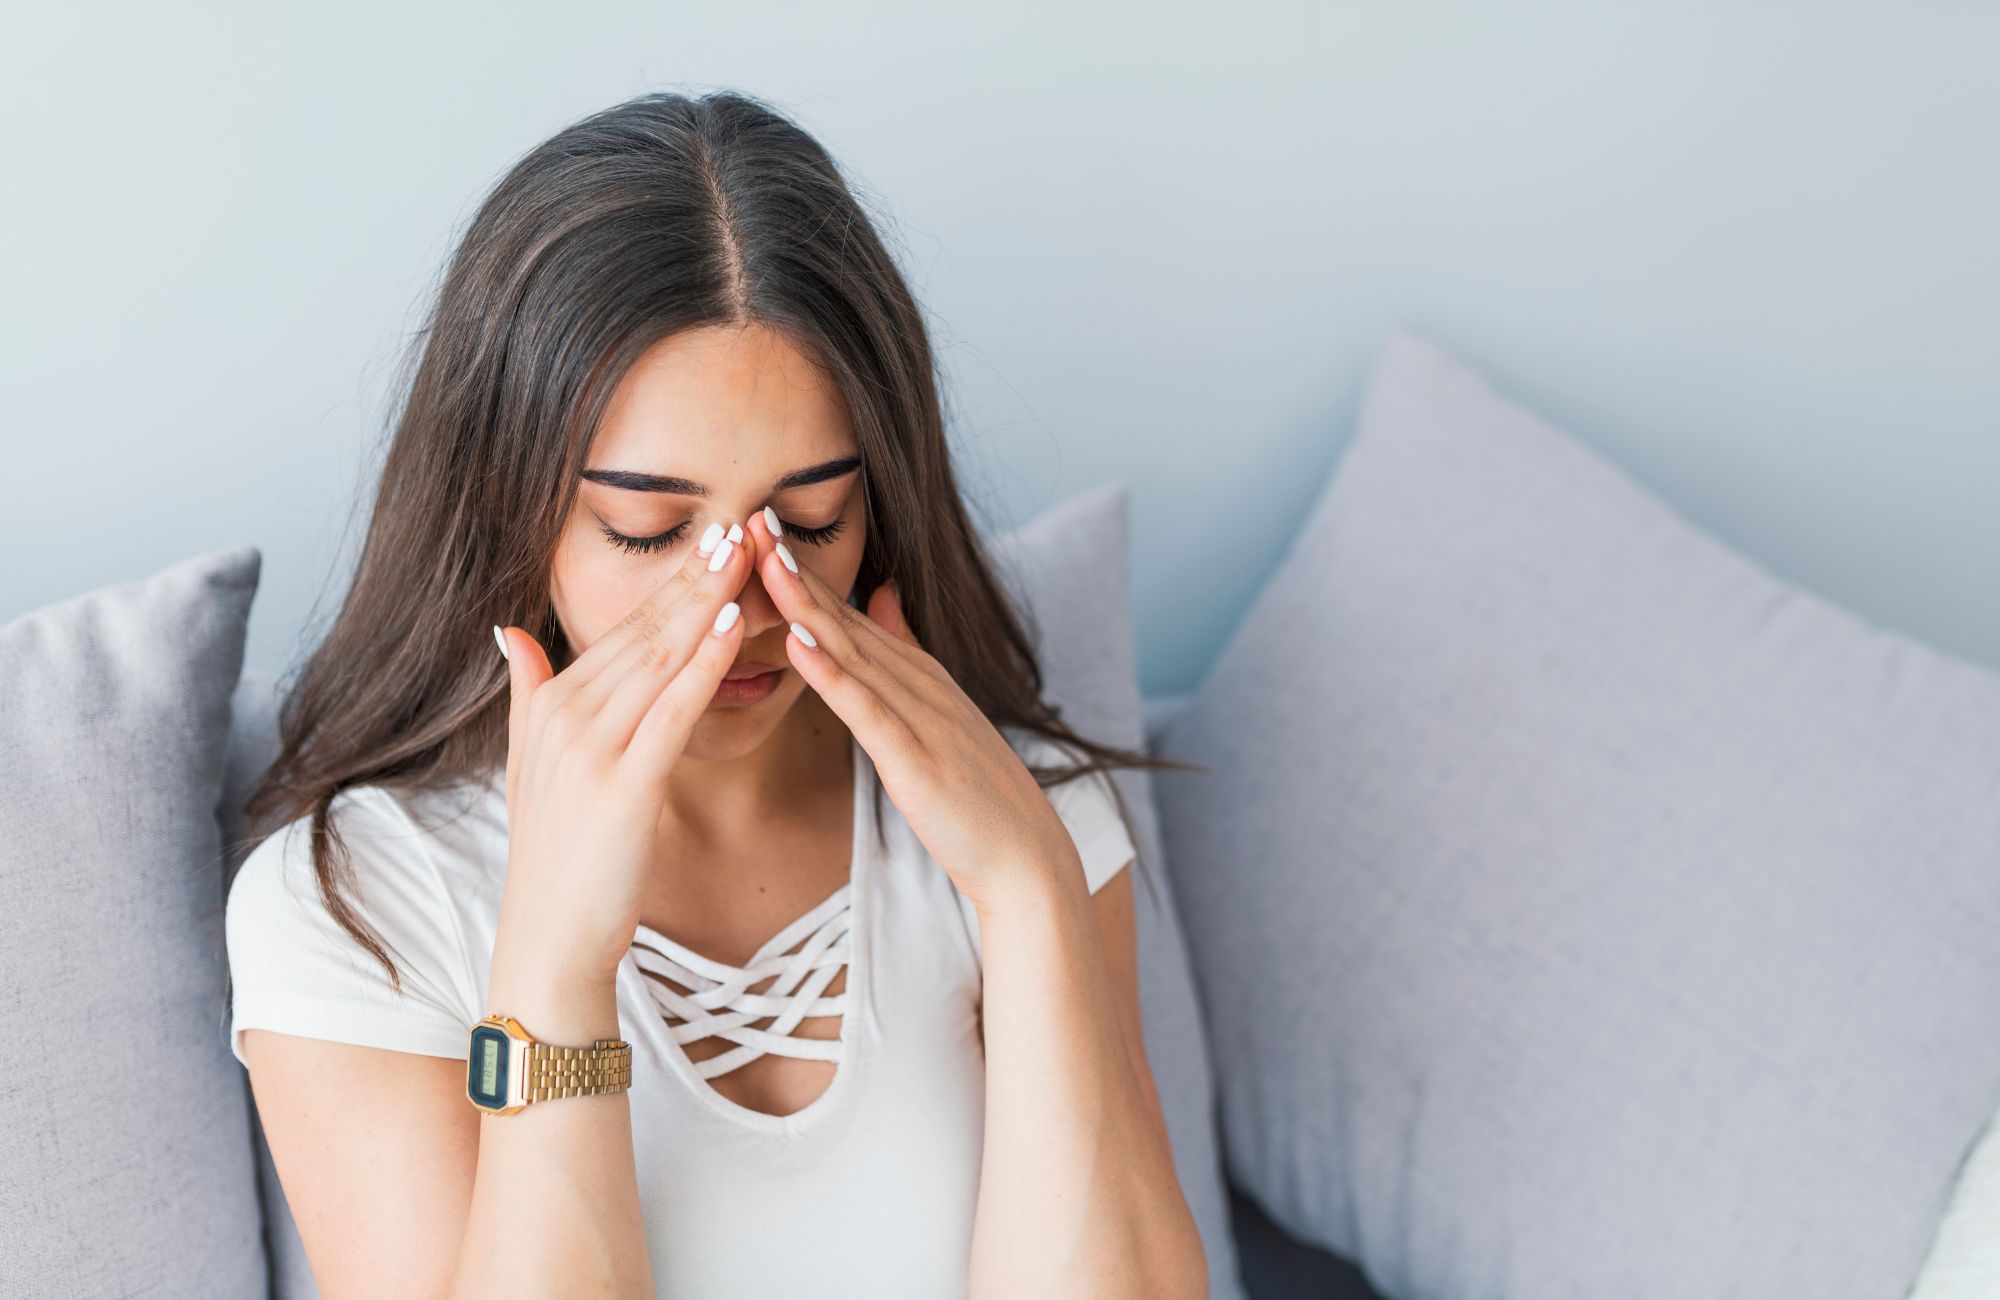 What To Do When You Have Congested Sinuses